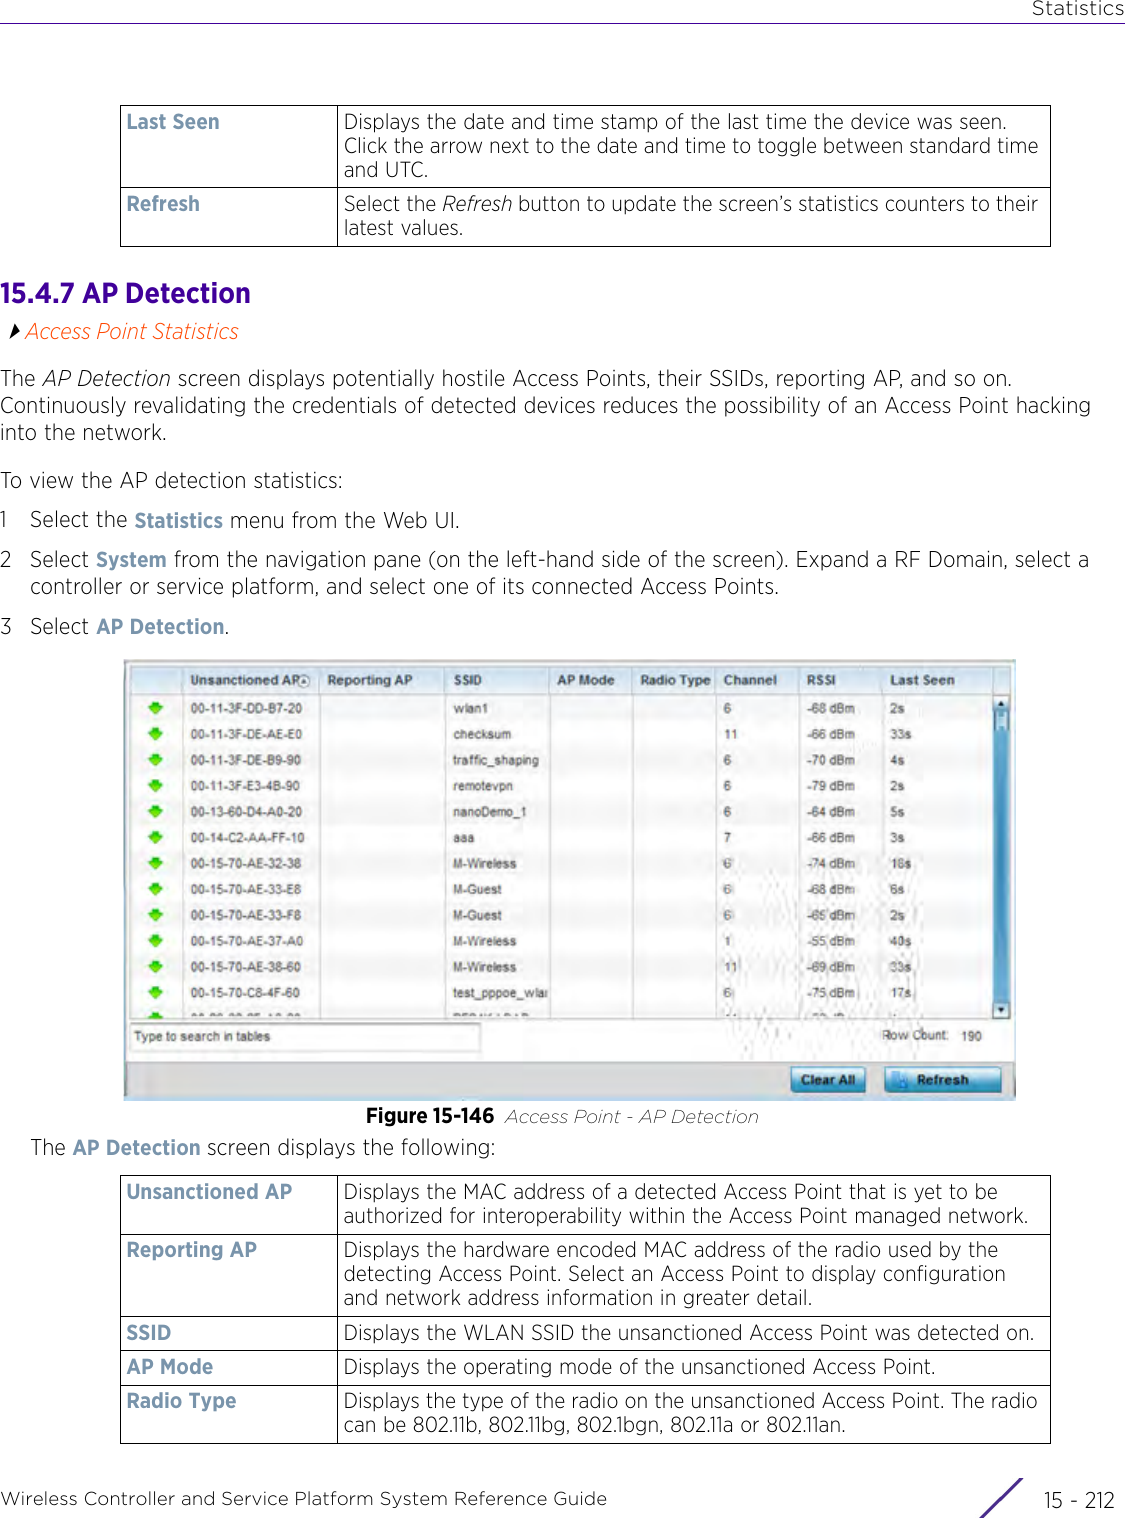 StatisticsWireless Controller and Service Platform System Reference Guide  15 - 21215.4.7 AP DetectionAccess Point StatisticsThe AP Detection screen displays potentially hostile Access Points, their SSIDs, reporting AP, and so on. Continuously revalidating the credentials of detected devices reduces the possibility of an Access Point hacking into the network. To view the AP detection statistics:1 Select the Statistics menu from the Web UI.2Select System from the navigation pane (on the left-hand side of the screen). Expand a RF Domain, select a controller or service platform, and select one of its connected Access Points.3Select AP Detection.Figure 15-146 Access Point - AP DetectionThe AP Detection screen displays the following:Last Seen Displays the date and time stamp of the last time the device was seen. Click the arrow next to the date and time to toggle between standard time and UTC.Refresh Select the Refresh button to update the screen’s statistics counters to their latest values.Unsanctioned AP Displays the MAC address of a detected Access Point that is yet to be authorized for interoperability within the Access Point managed network.Reporting AP Displays the hardware encoded MAC address of the radio used by the detecting Access Point. Select an Access Point to display configuration and network address information in greater detail. SSID Displays the WLAN SSID the unsanctioned Access Point was detected on.AP Mode Displays the operating mode of the unsanctioned Access Point.Radio Type Displays the type of the radio on the unsanctioned Access Point. The radio can be 802.11b, 802.11bg, 802.1bgn, 802.11a or 802.11an.